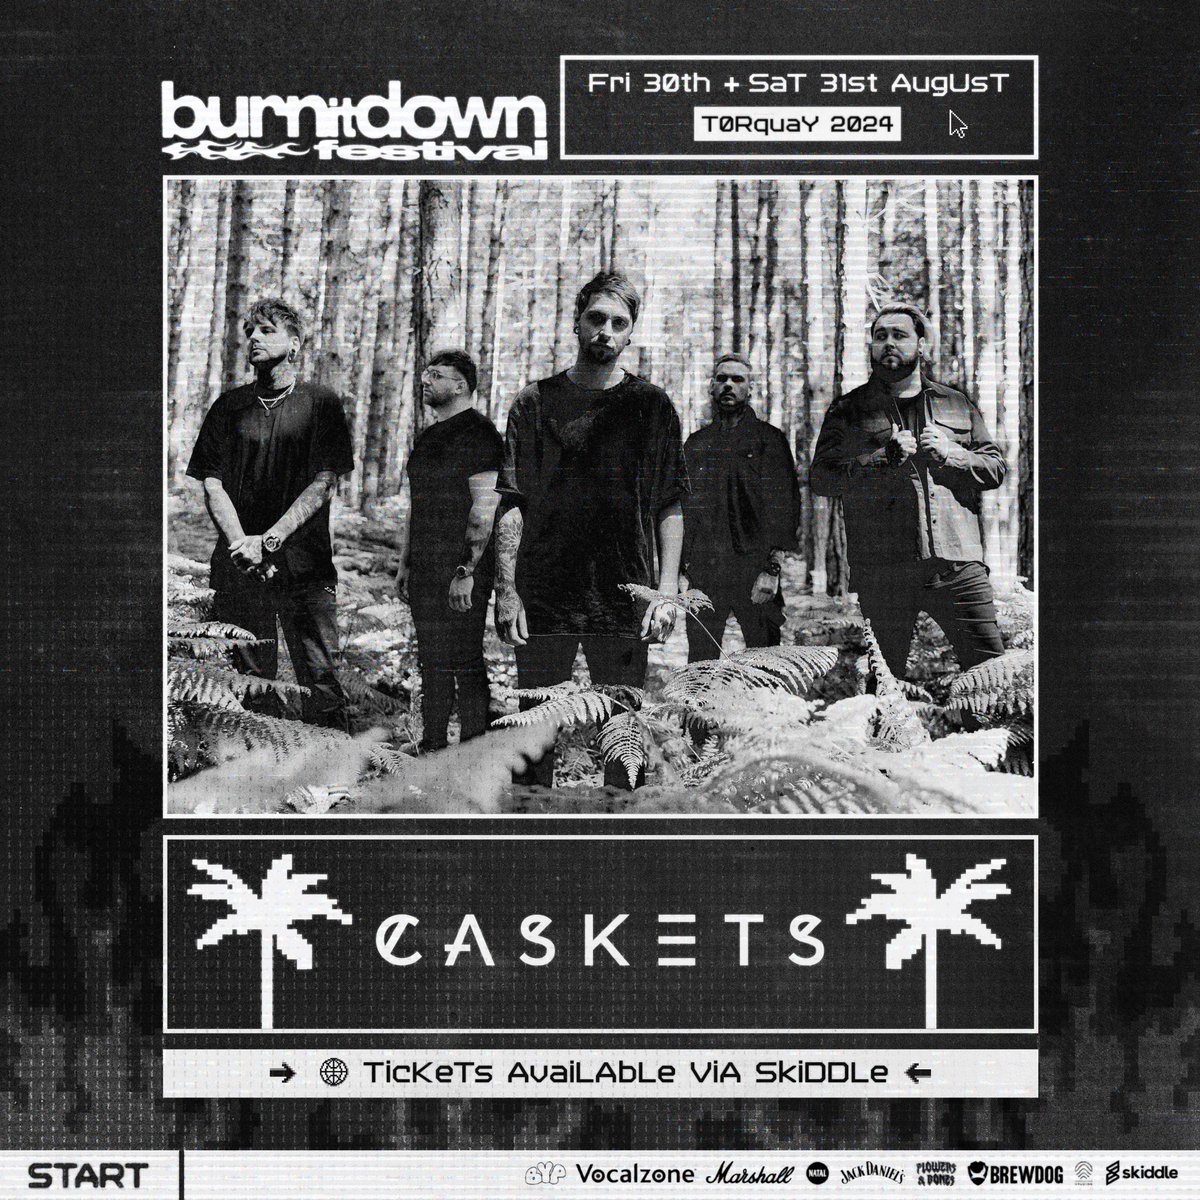 Stoked to be playing this years @BurnItDownFest - Tickets on sale this Thursday - 10AM